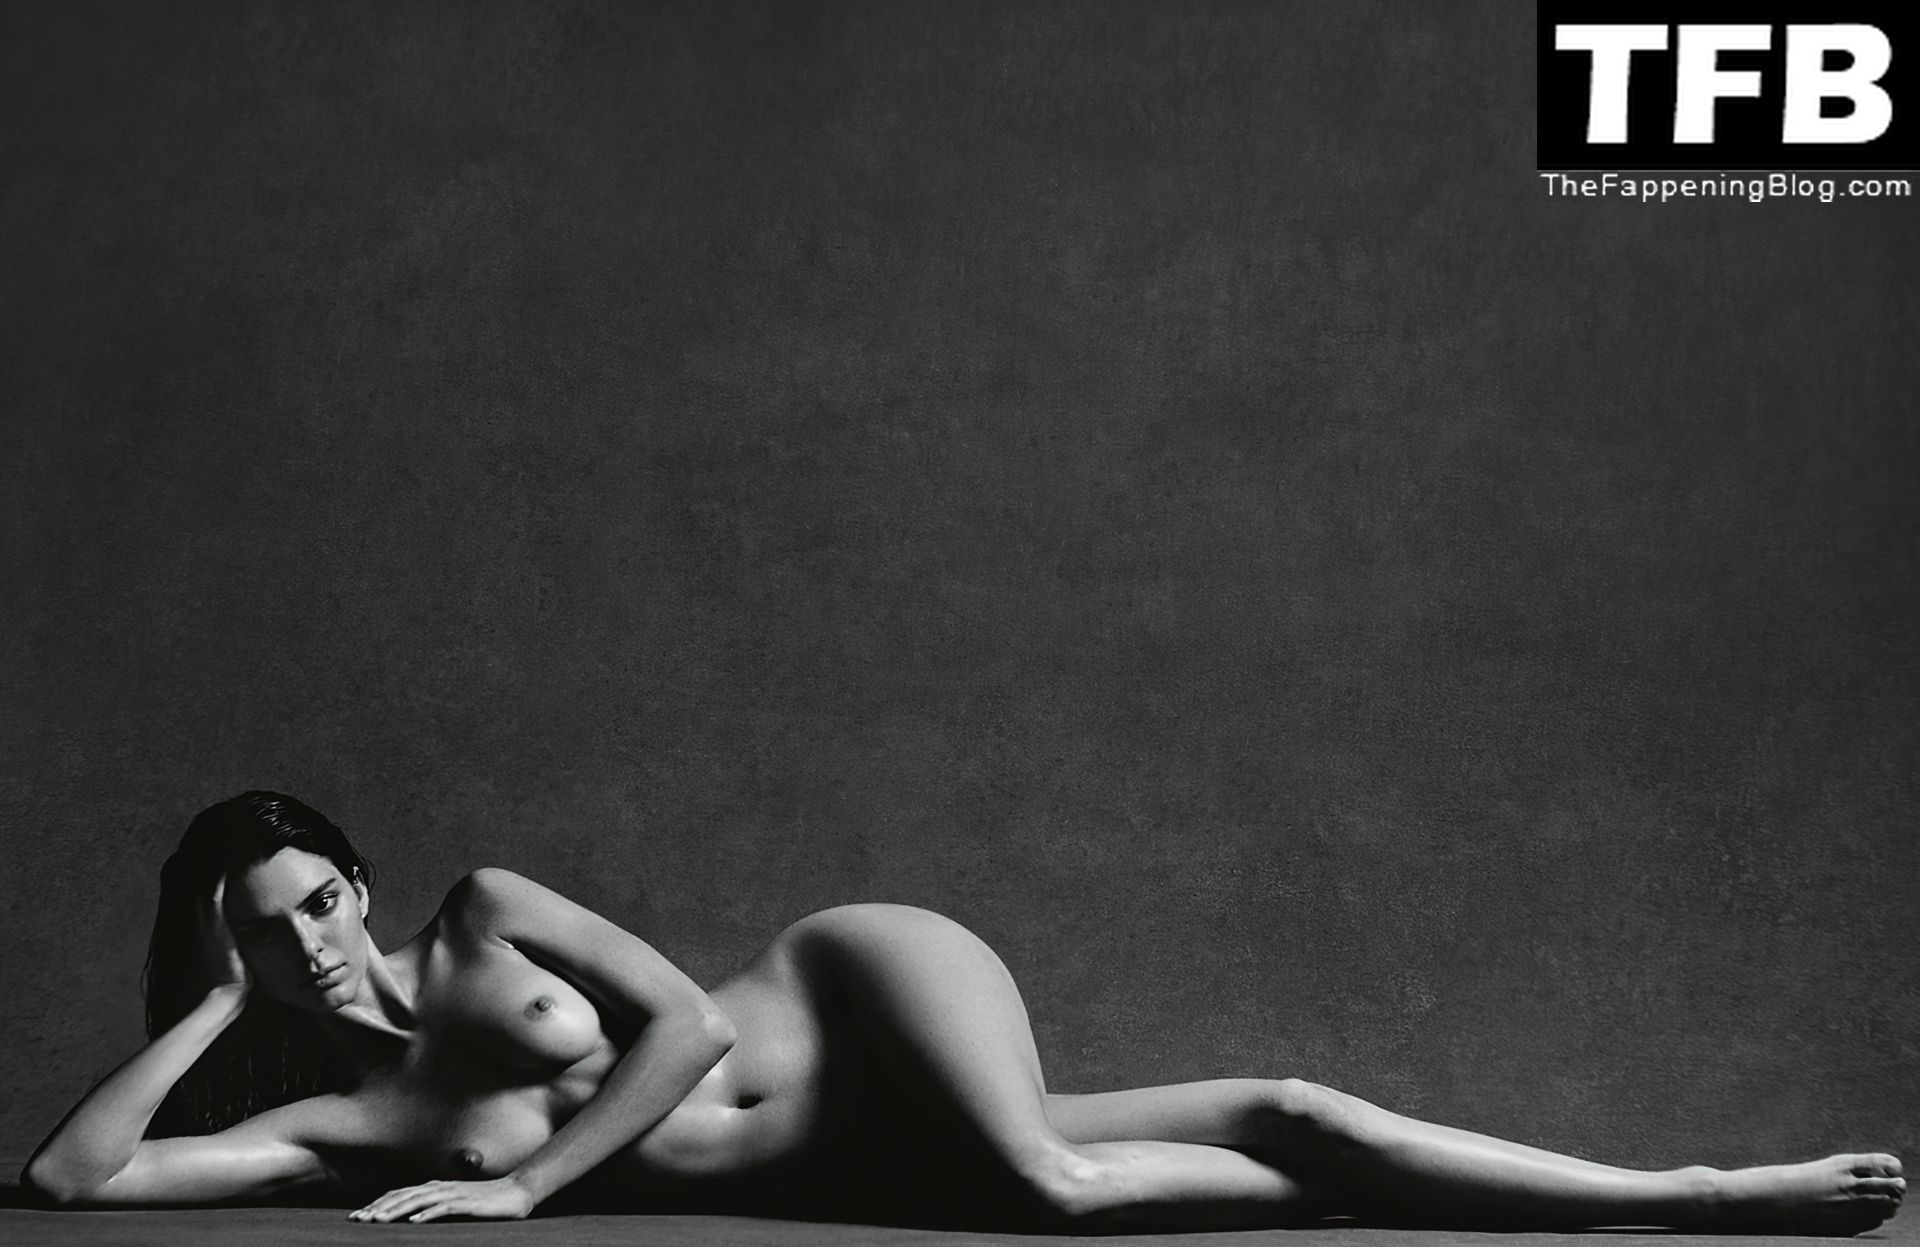 Kendall-Jenner-Nude-Sexy-i-D-Magazine-The-Fappening-Blog-14.jpg